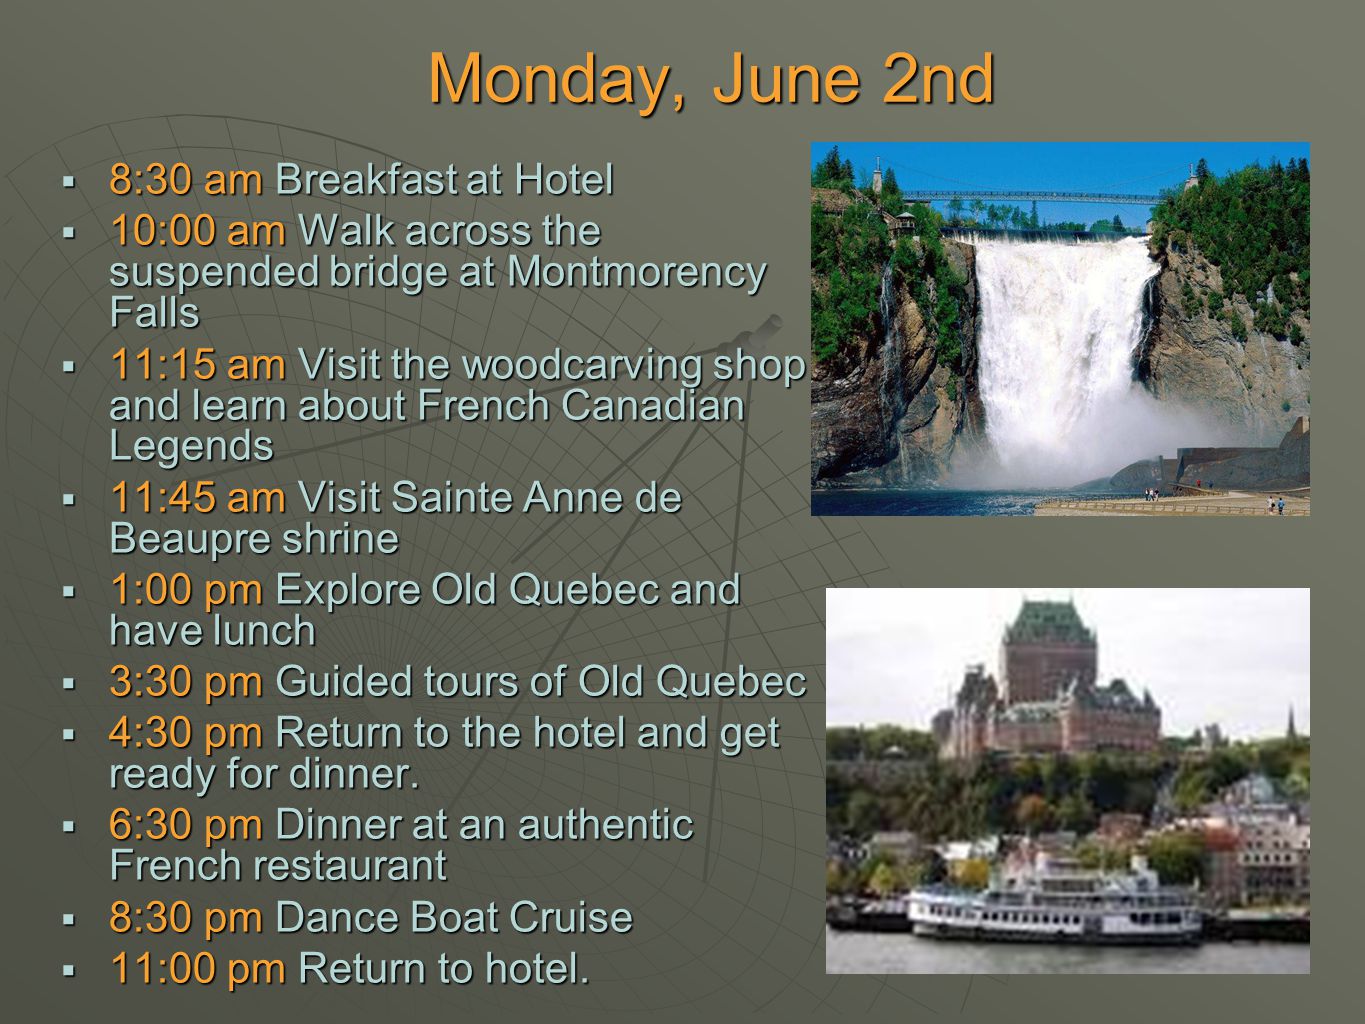  8:30 am Breakfast at Hotel  10:00 am Walk across the suspended bridge at Montmorency Falls  11:15 am Visit the woodcarving shop and learn about French Canadian Legends  11:45 am Visit Sainte Anne de Beaupre shrine  1:00 pm Explore Old Quebec and have lunch  3:30 pm Guided tours of Old Quebec  4:30 pm Return to the hotel and get ready for dinner.